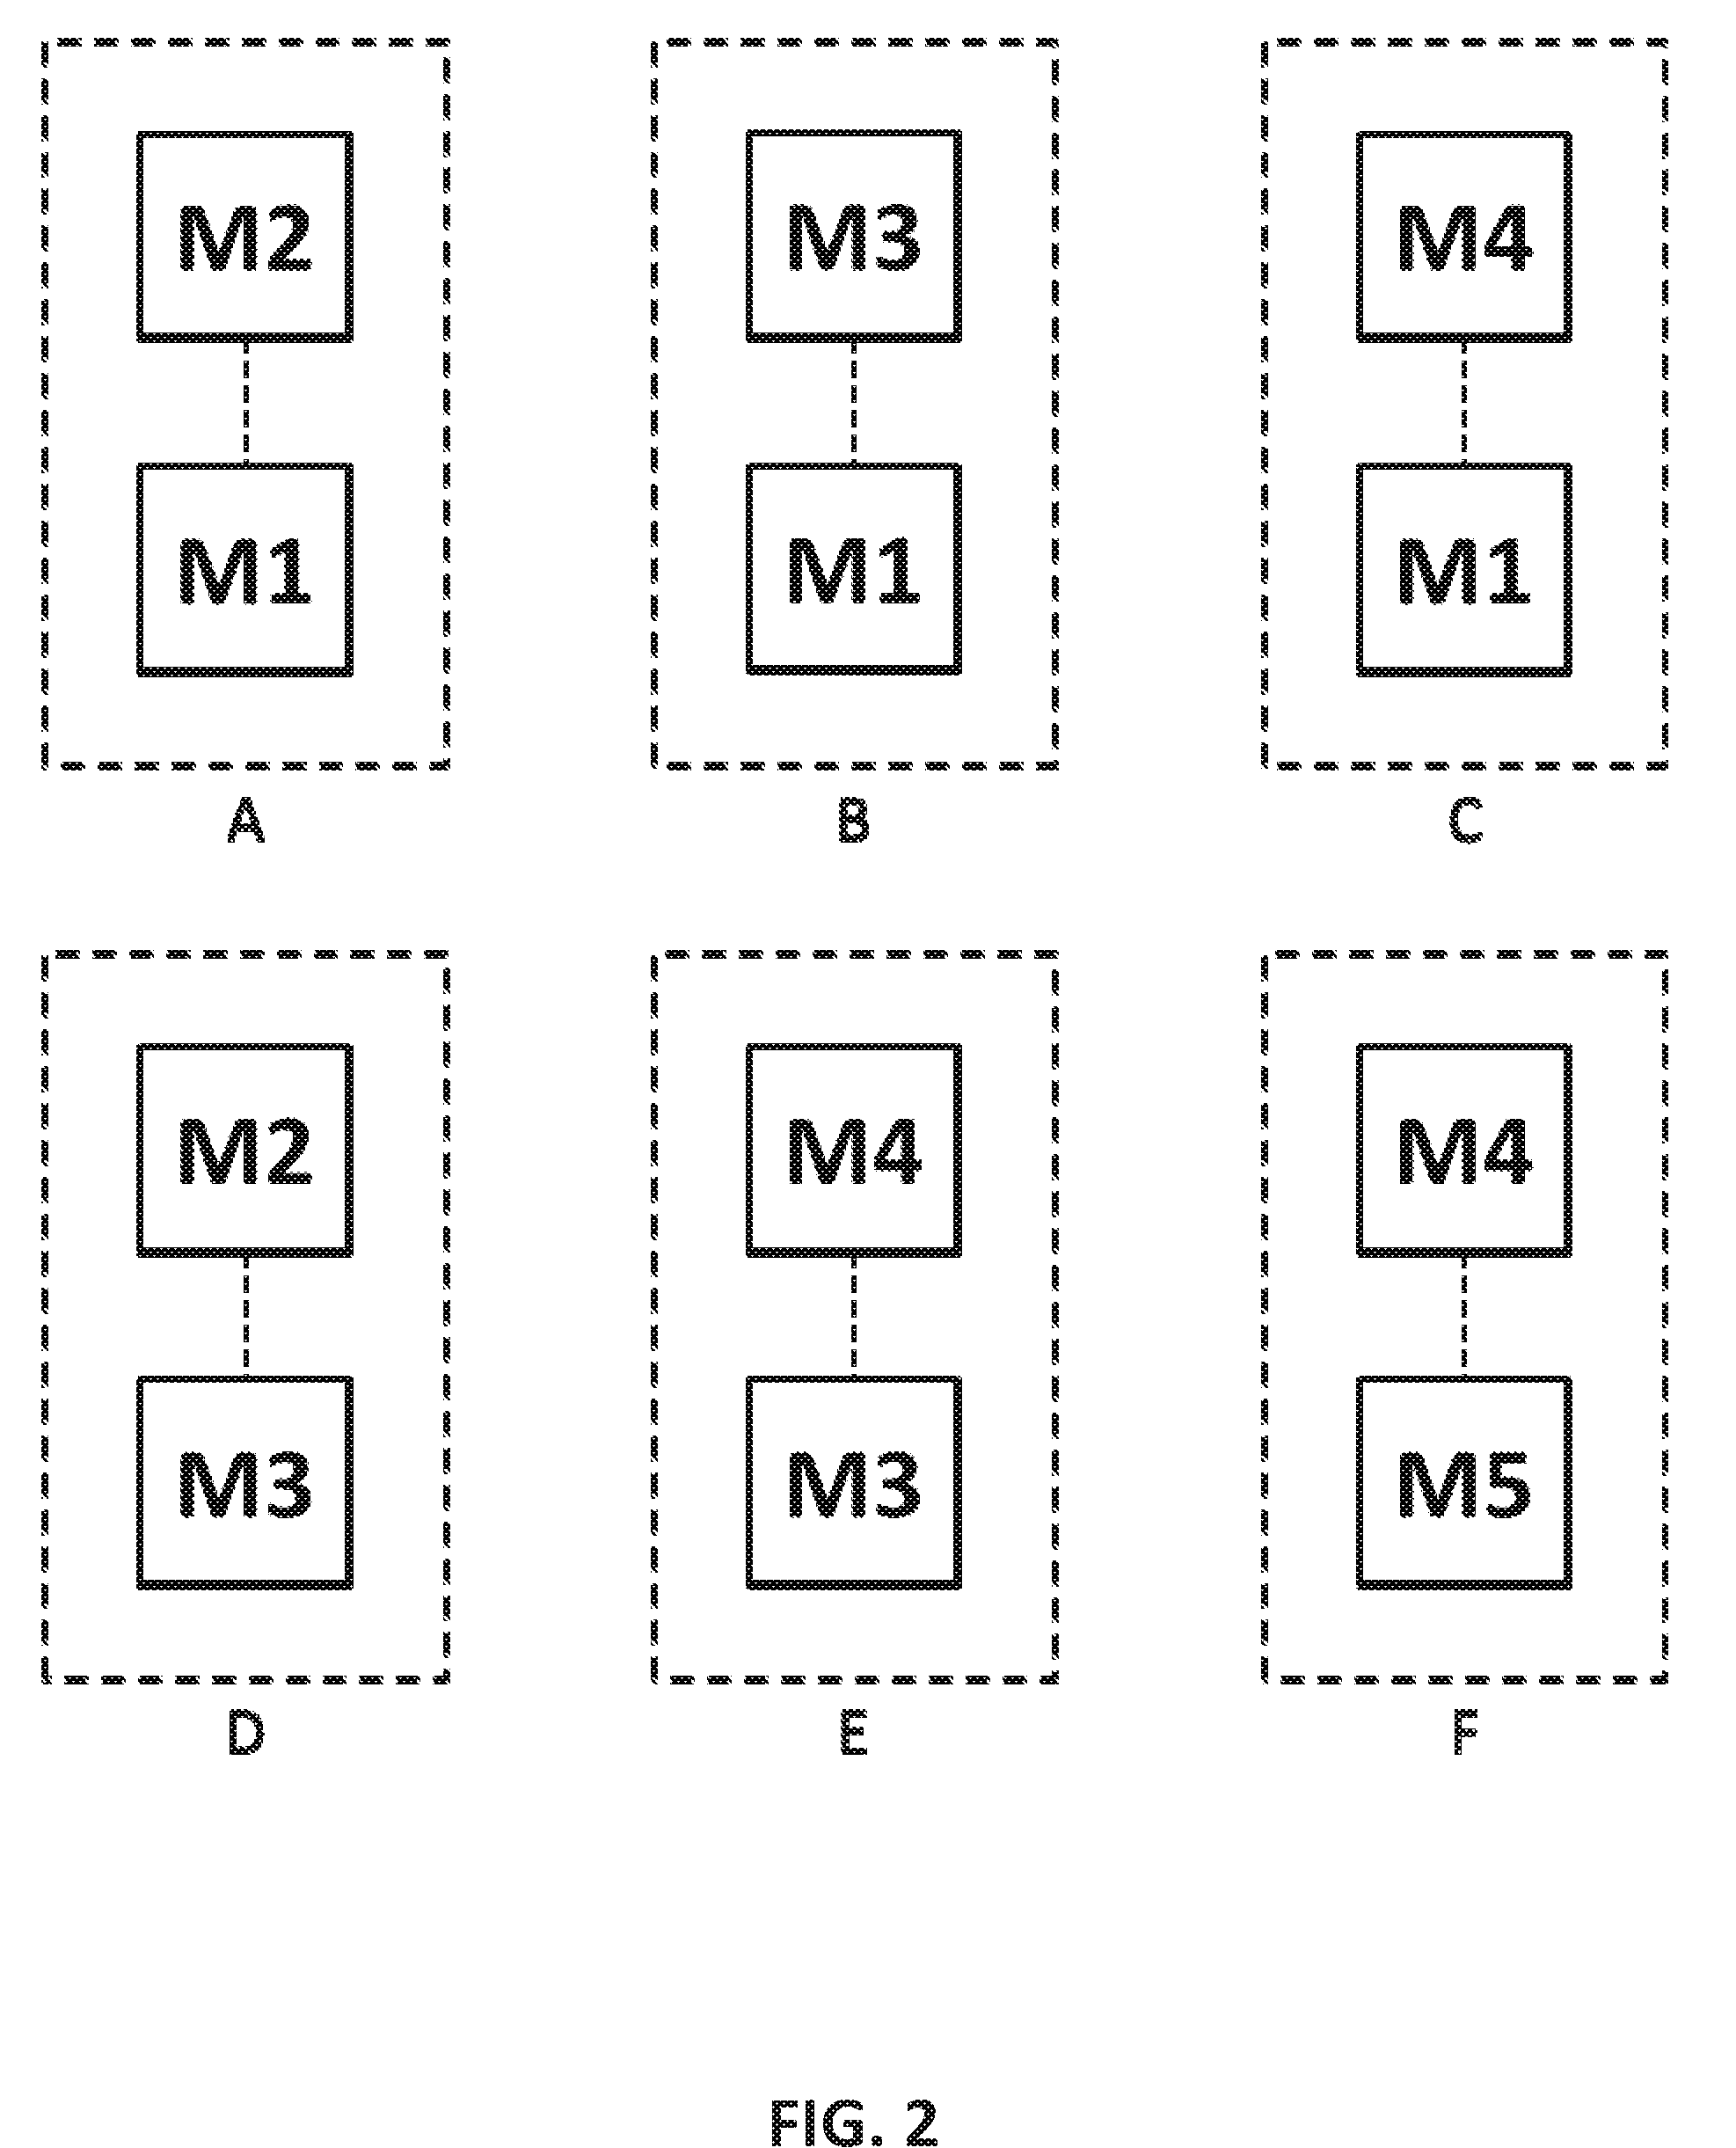 Advanced tritium system and advanced permeation system for separation of tritium from radioactive wastes